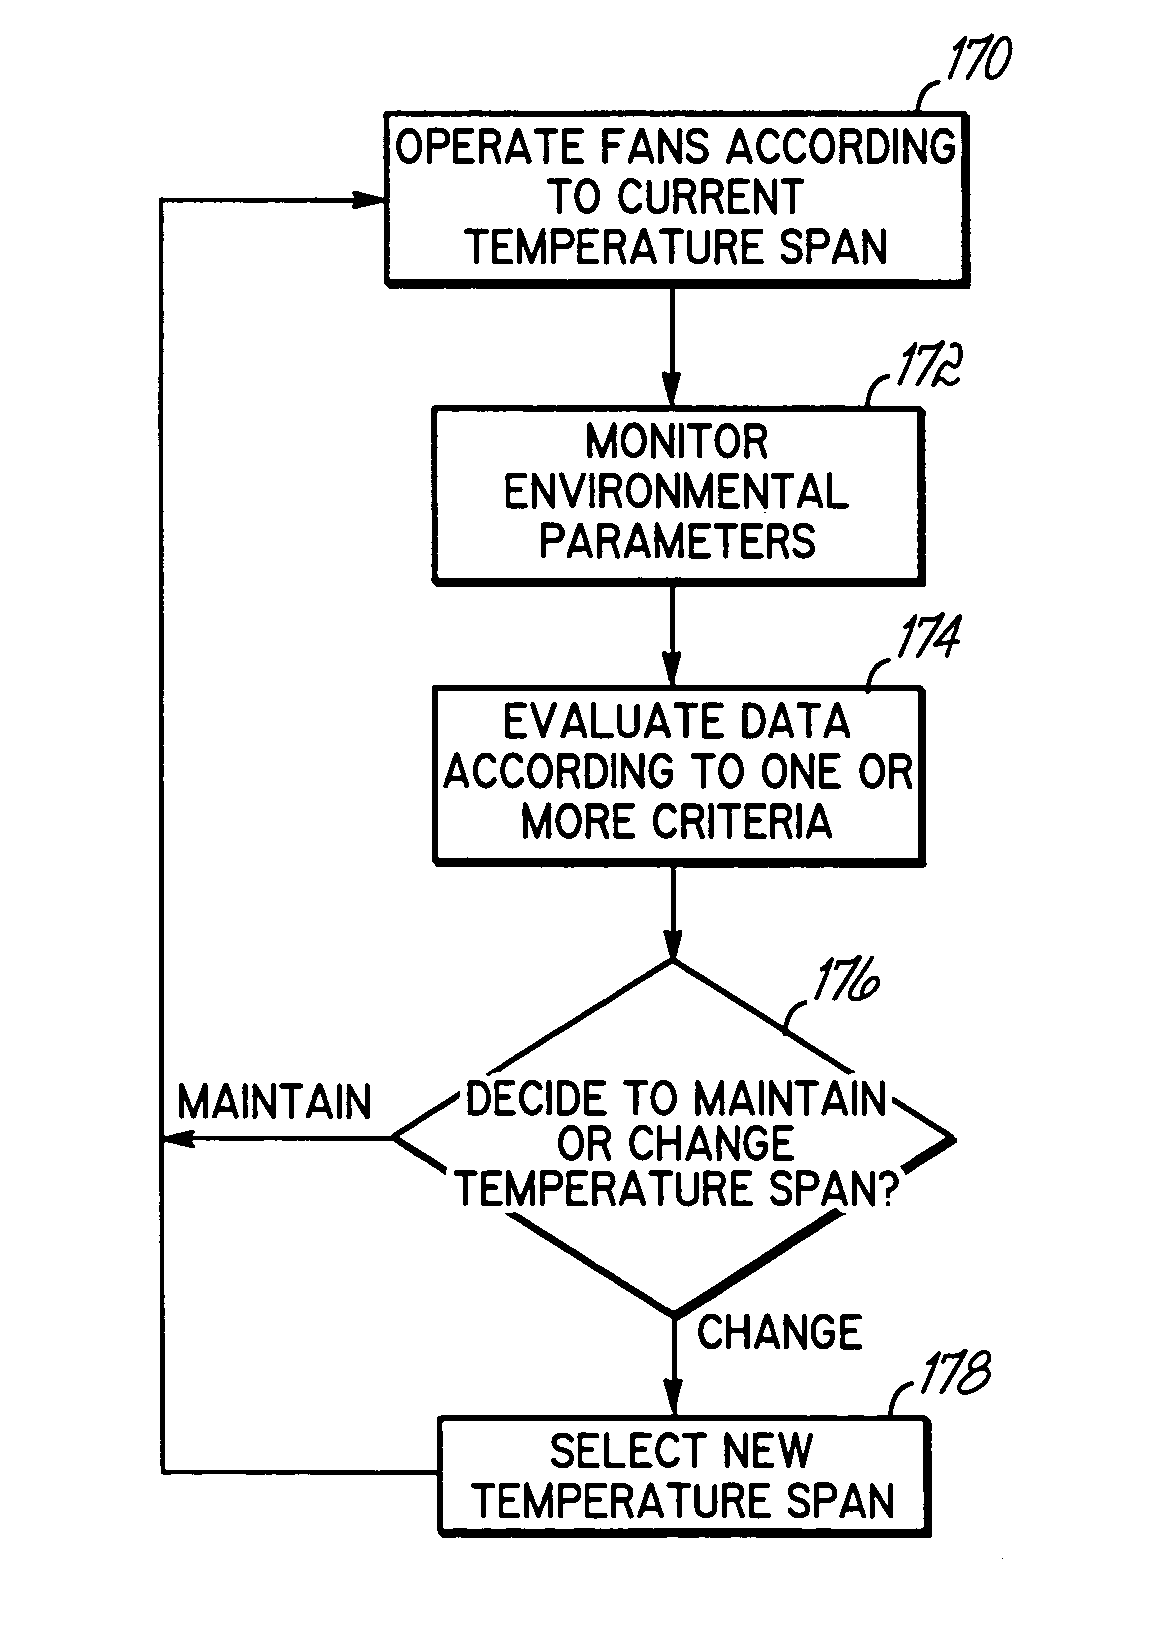 Kitchen exhaust optimal temperature span system and method